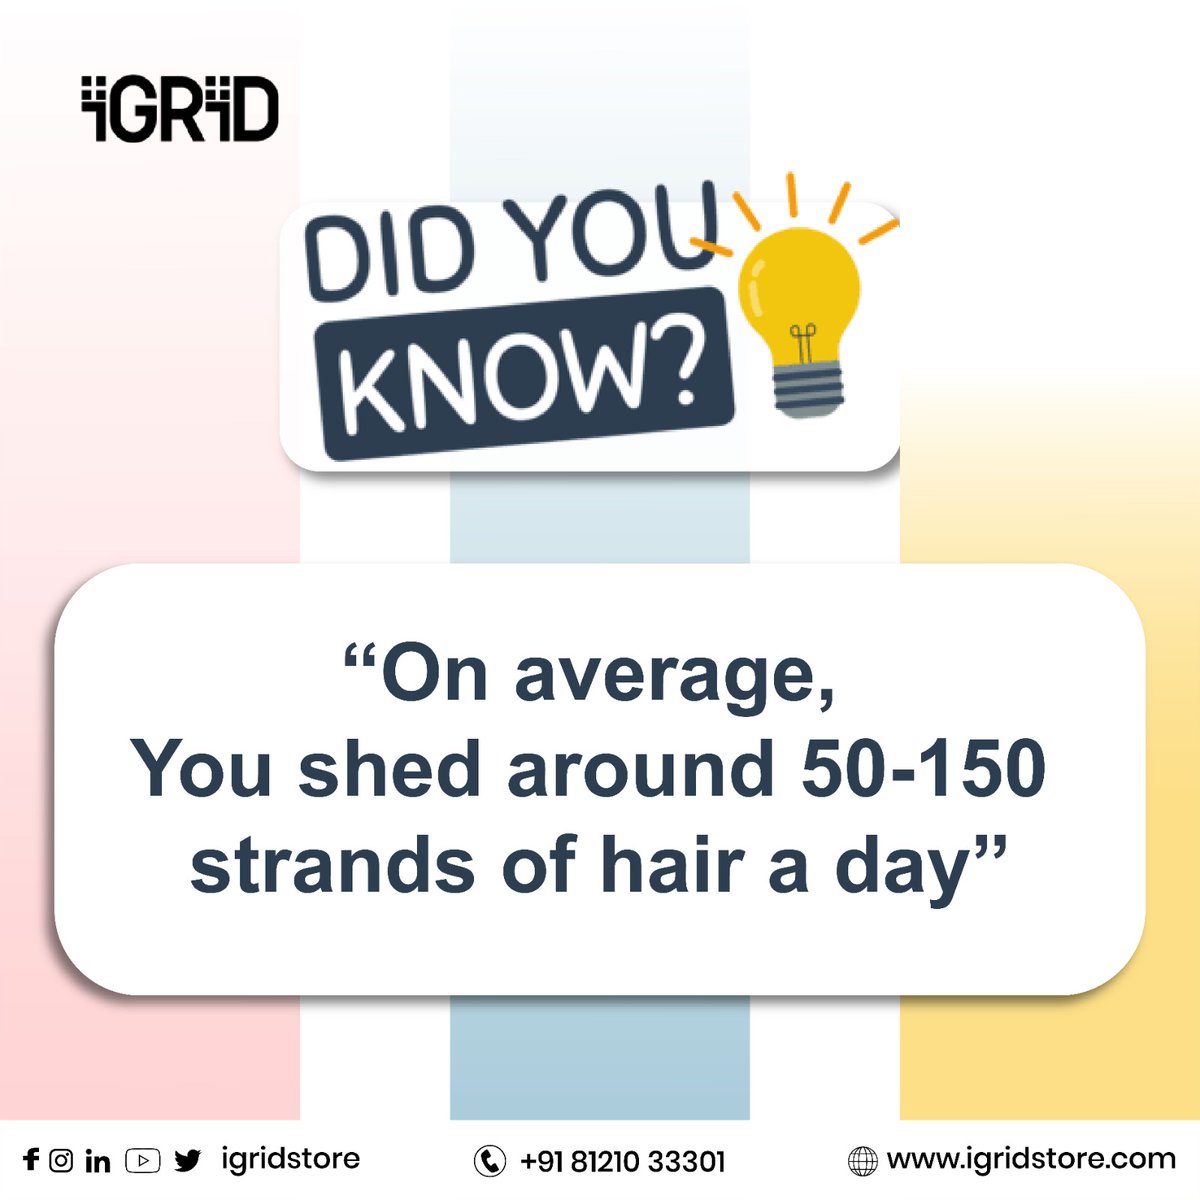 '𝐃𝐢𝐝 𝐲𝐨𝐮 𝐤𝐧𝐨𝐰? The Surprising Truth About How Much 𝐇𝐚𝐢𝐫 You Really 𝐒𝐡𝐞𝐝 𝐄𝐚𝐜𝐡 𝐃𝐚𝐲'  #igrid #haircare #hairfacts #hairhealth #dailyhaircare #haircaretips #buyonlineindia #shopnowonline #samedaydeliveryindia #freeshippinginindia #quality #warranty1year